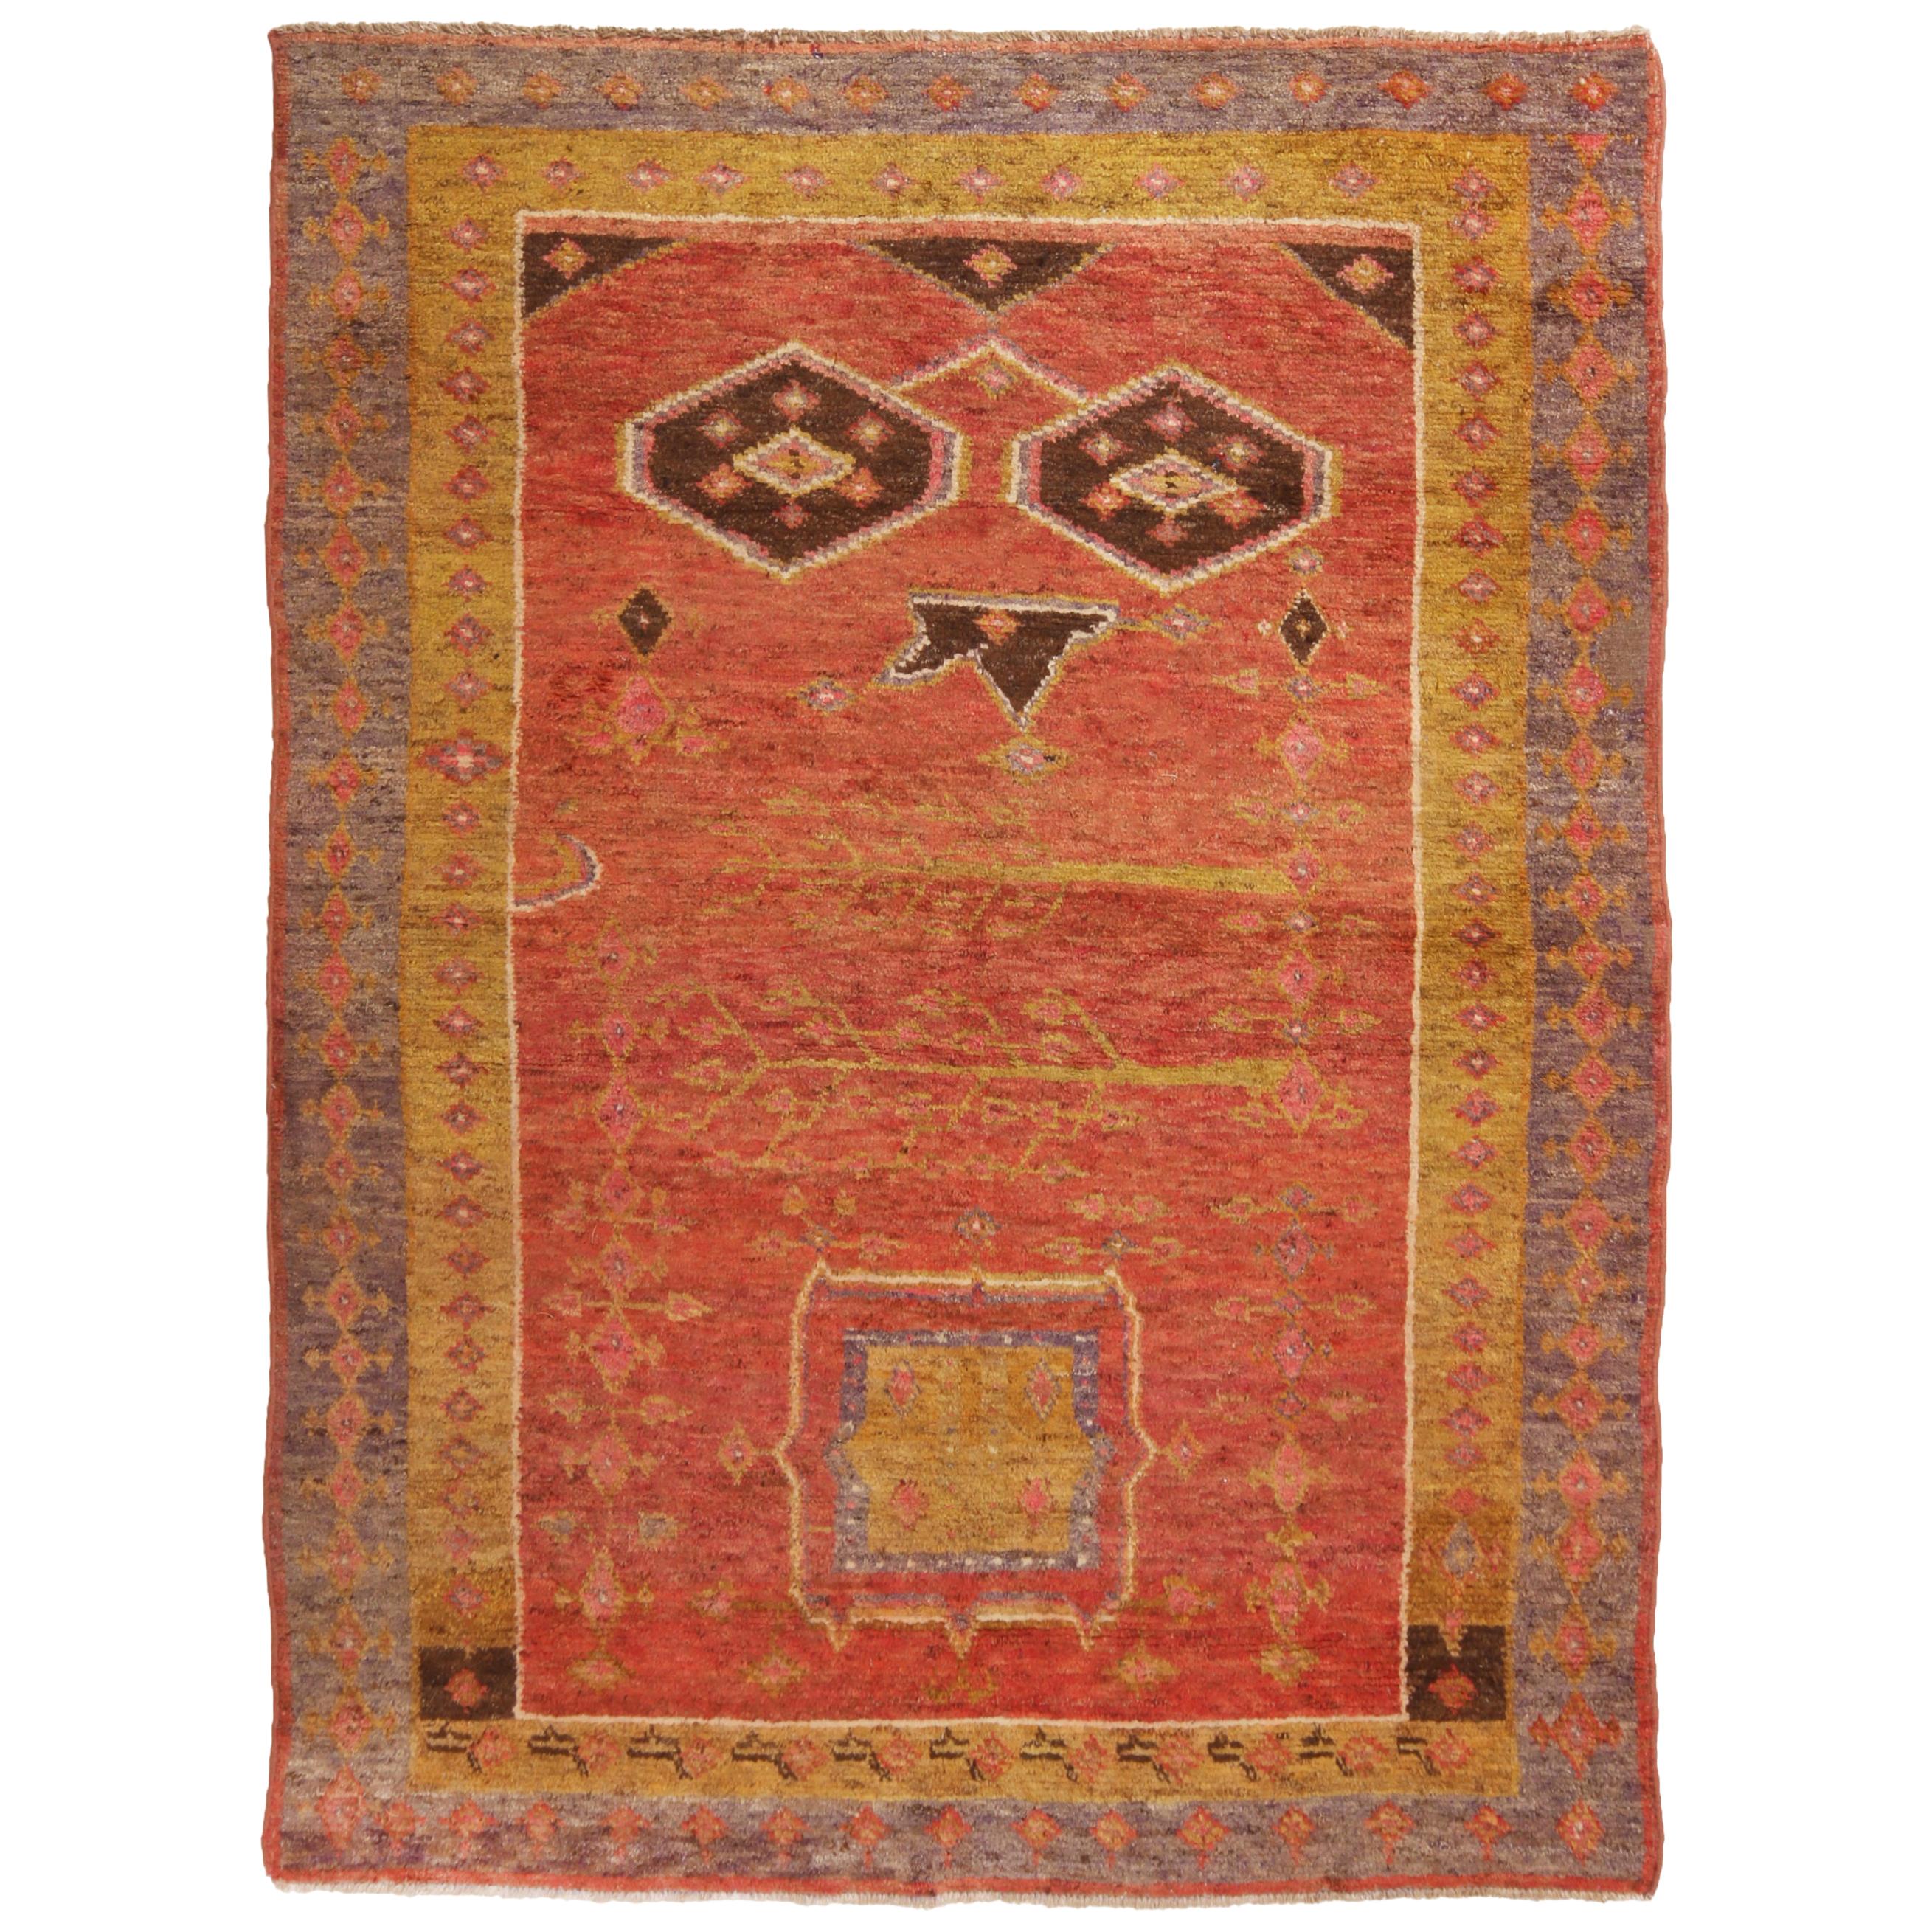 Antique Khotan Traditional Geometric Red and Golden Yellow Wool Rug